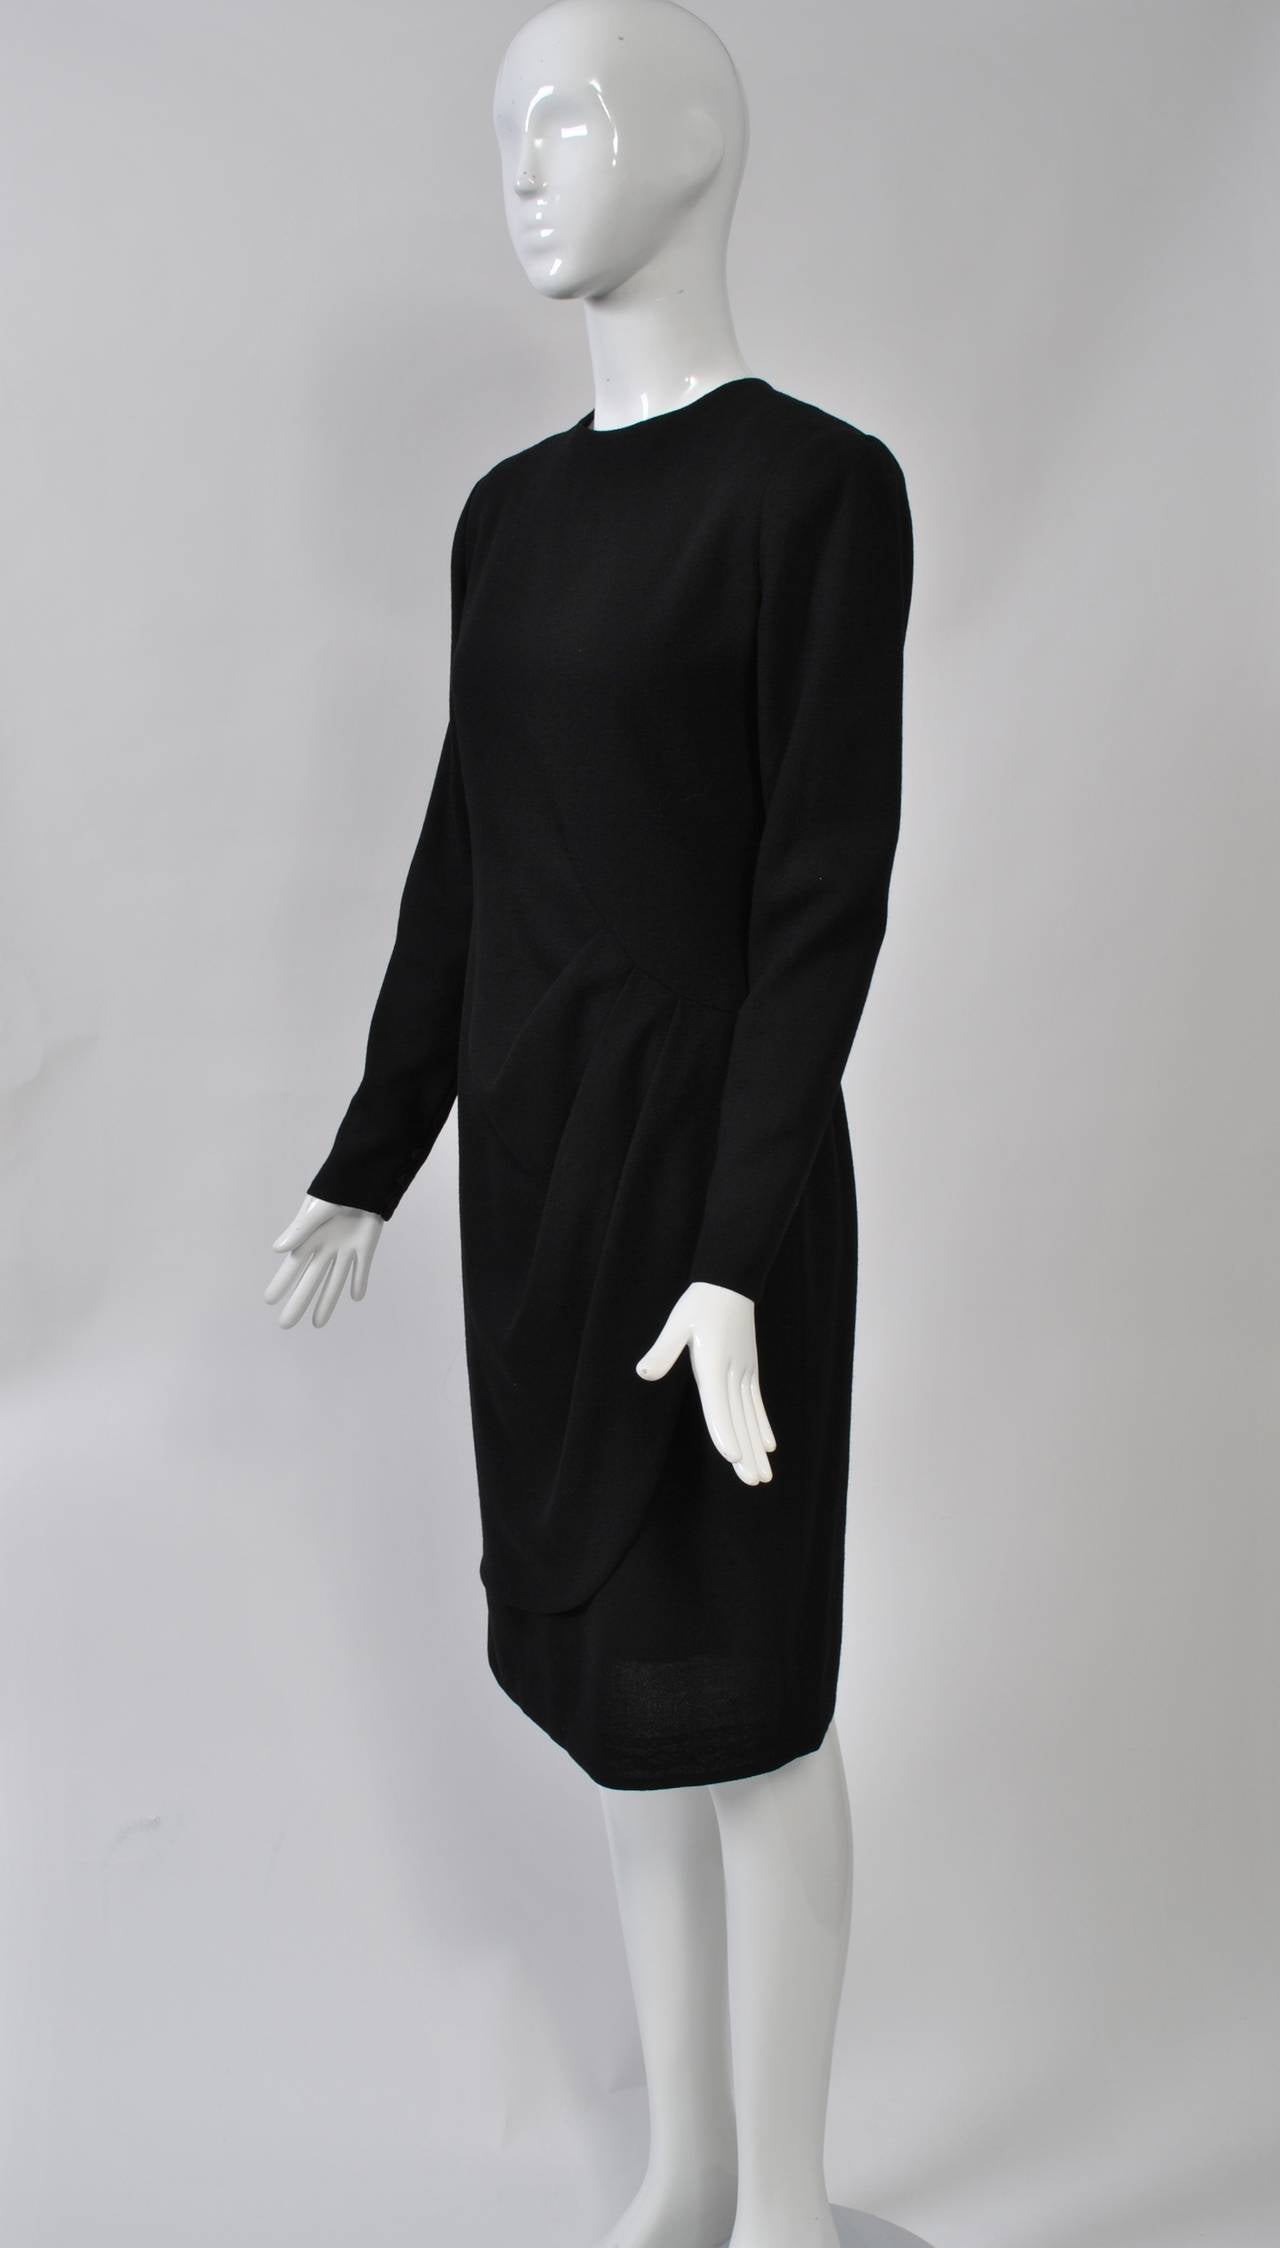 LBD by Bill Blass can take you anywhere, dressed up or down. In black wool crepe, the simple sheath dress is distinguished by a wrap front overskirt gathered on one side. High neck and long sleeves with buttoned wrists. Back zipper. Lined.